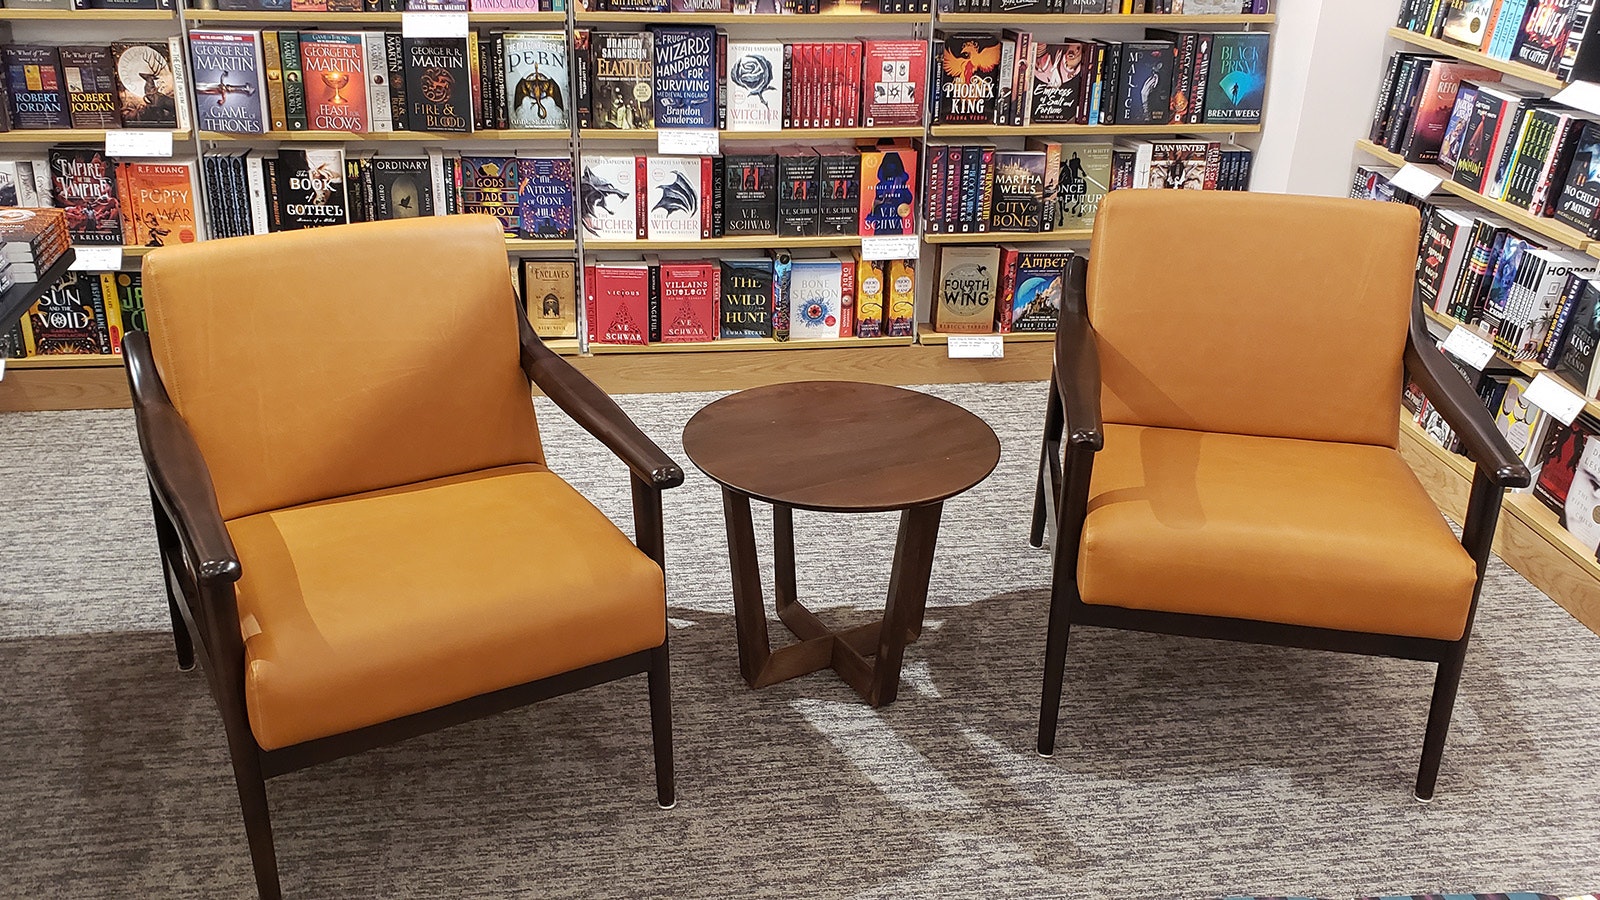 There will be seating in different areas of the bookstores so people can relax and drink coffee while they are there. The store won't have its own coffee shop, but customers are encouraged to bring their own.